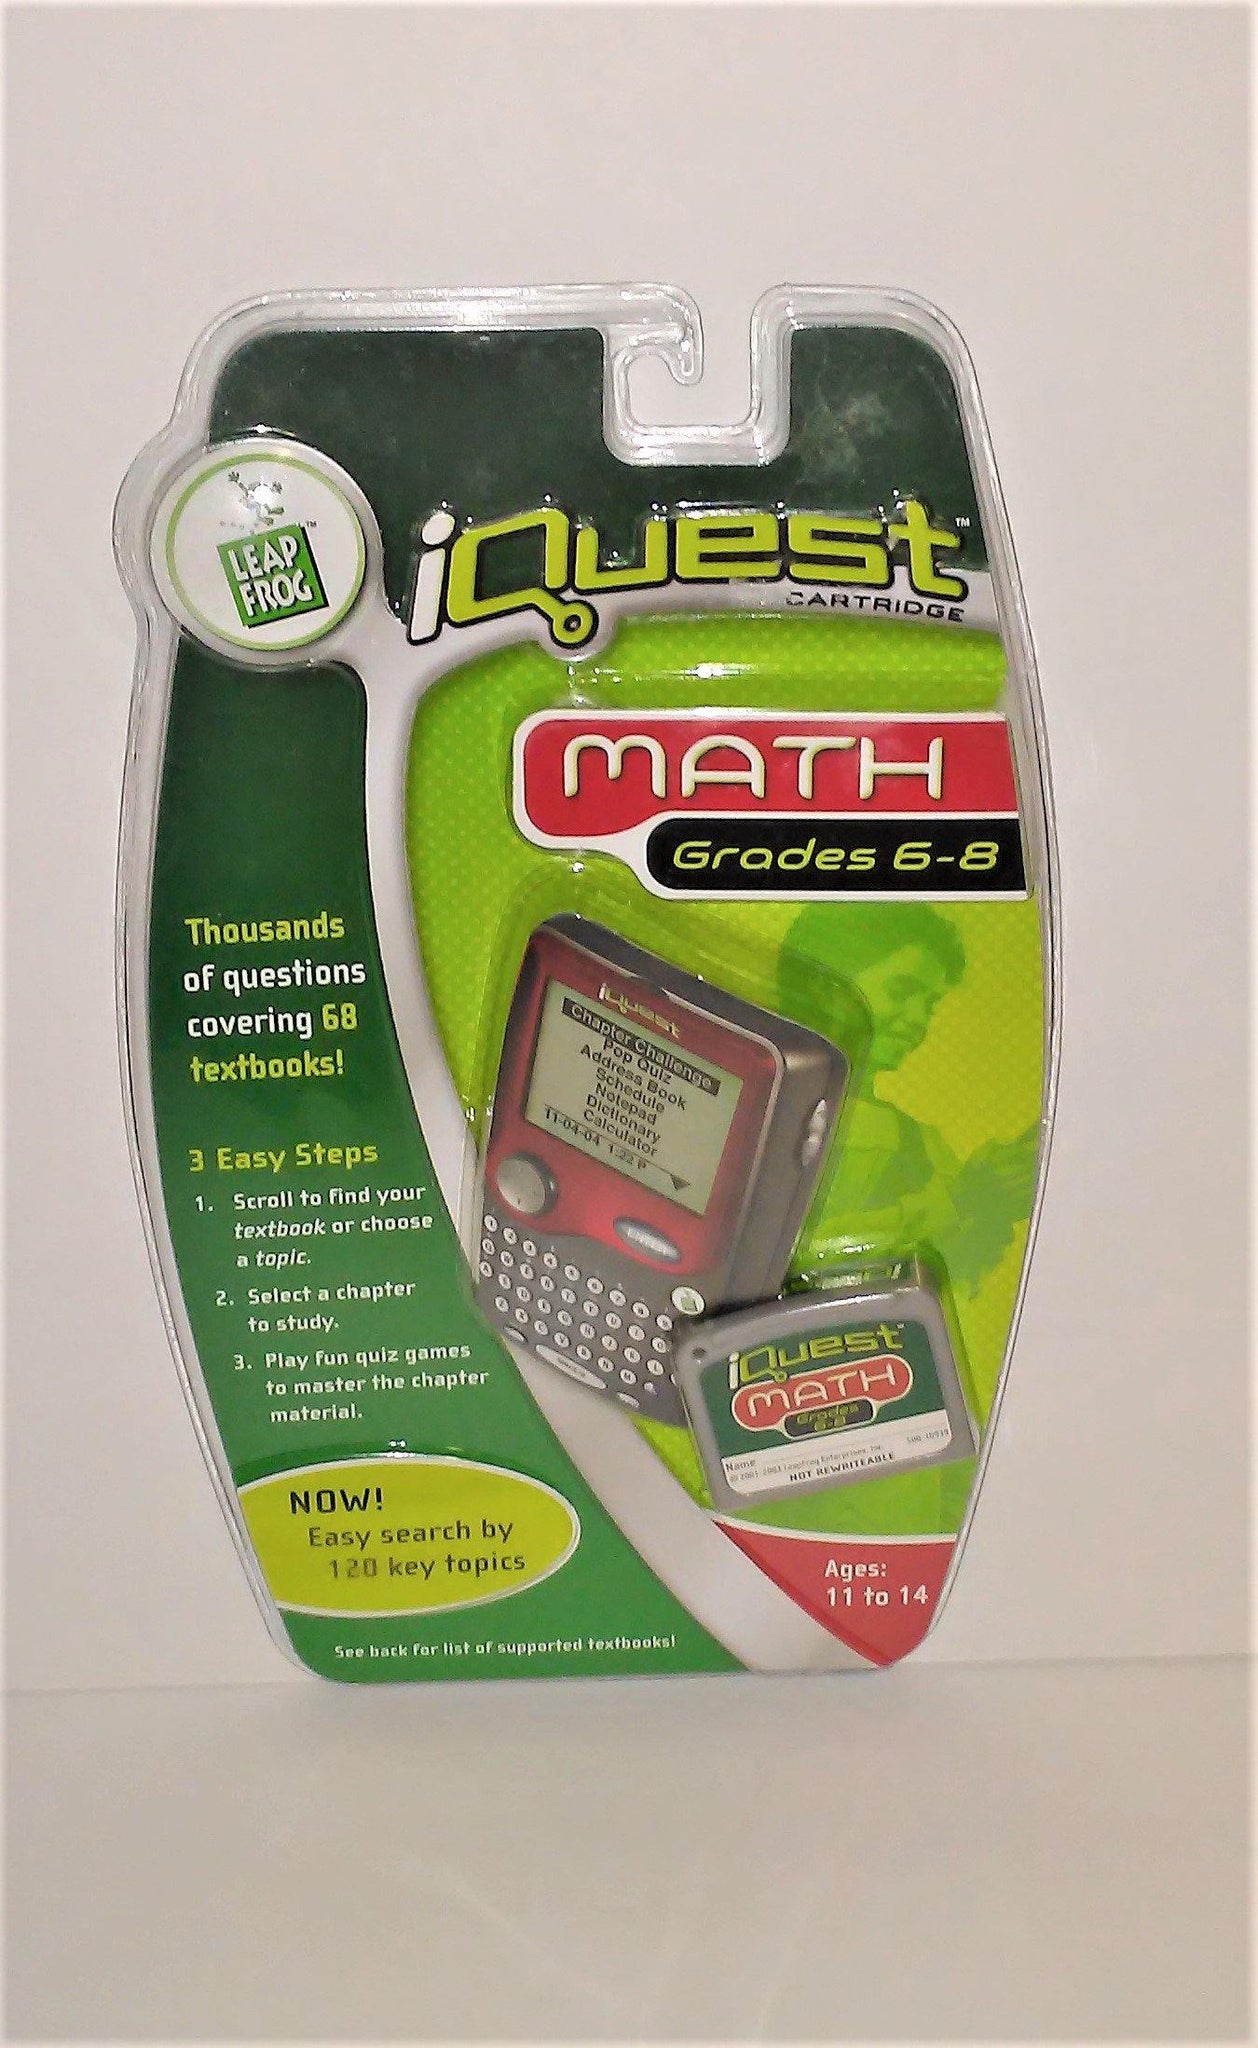 Leap Frog IQUEST MATH Grades 6-8 Educational Cartridge for ages 11-14 –  Sandee's Memories & Collectibles